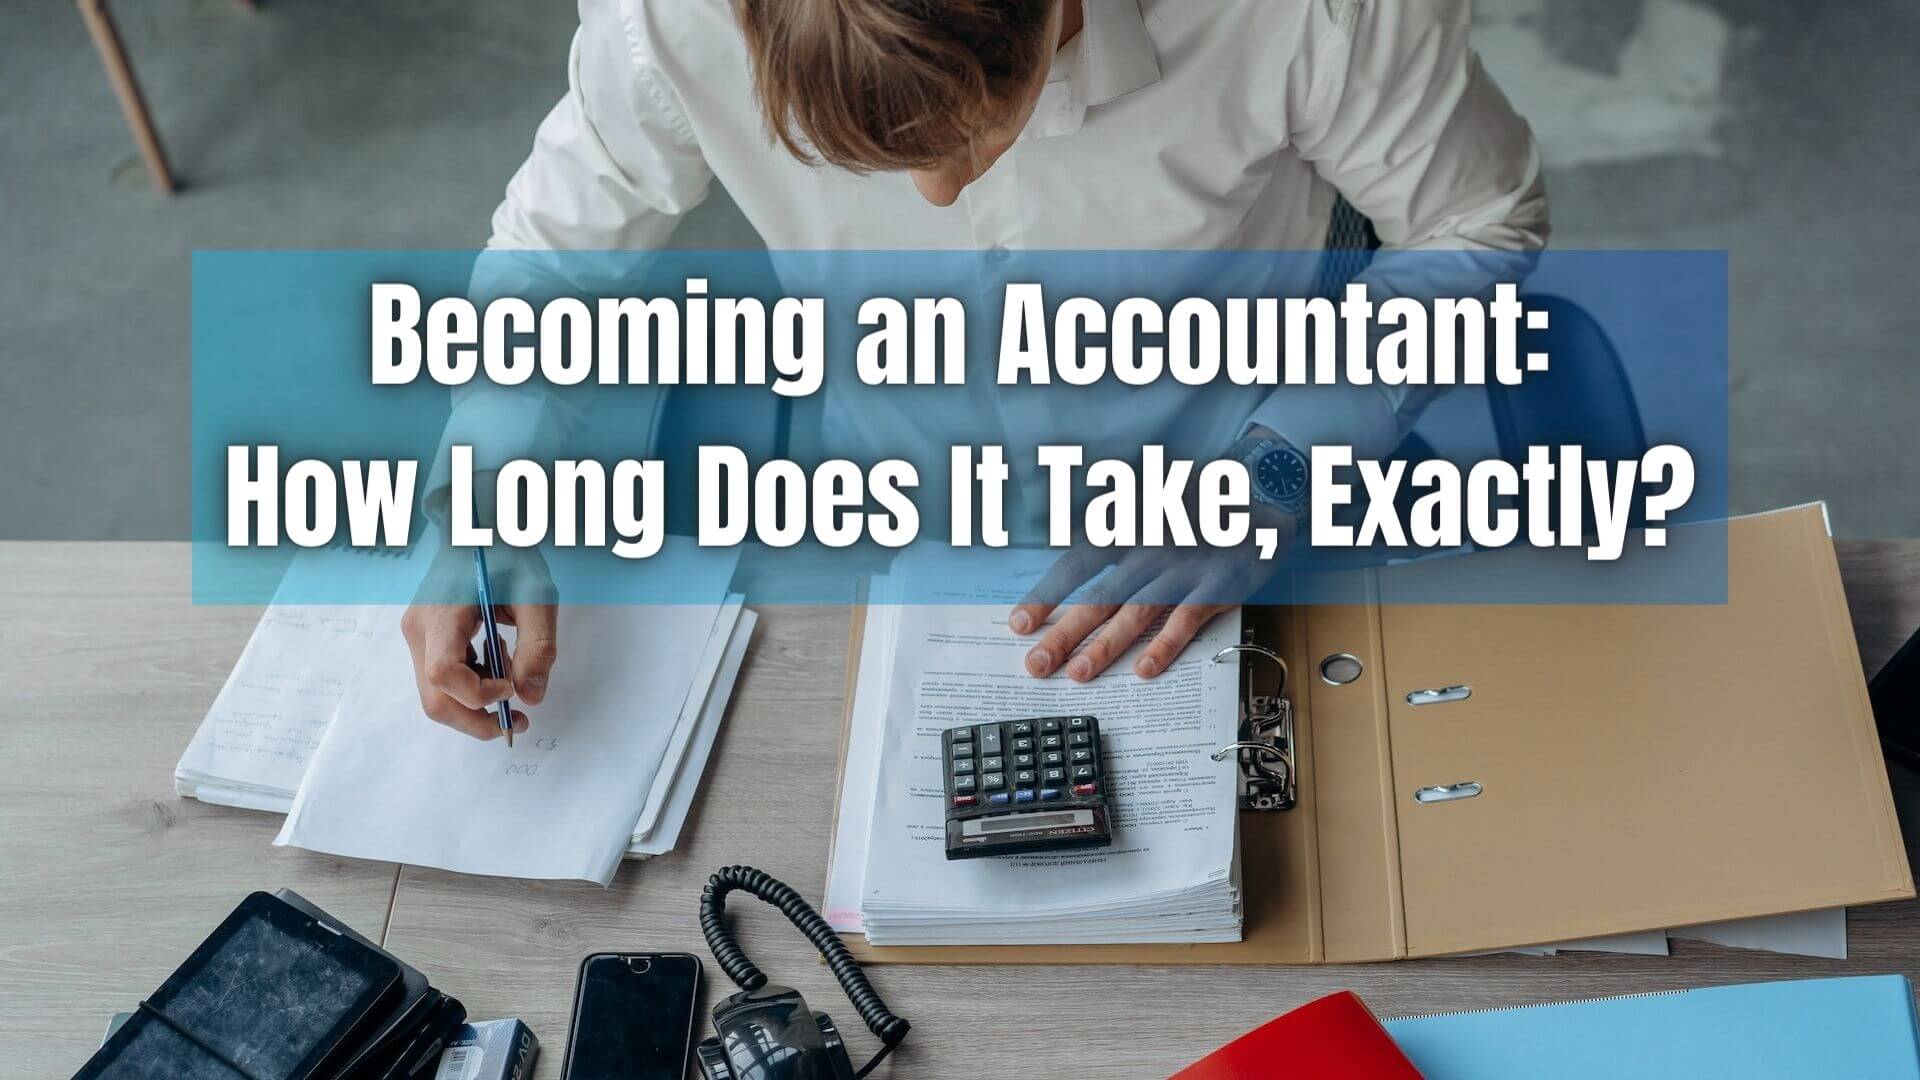 How long does it take to be an accountant? Here's the length of time it will take for an aspiring accountant to reach their goals.